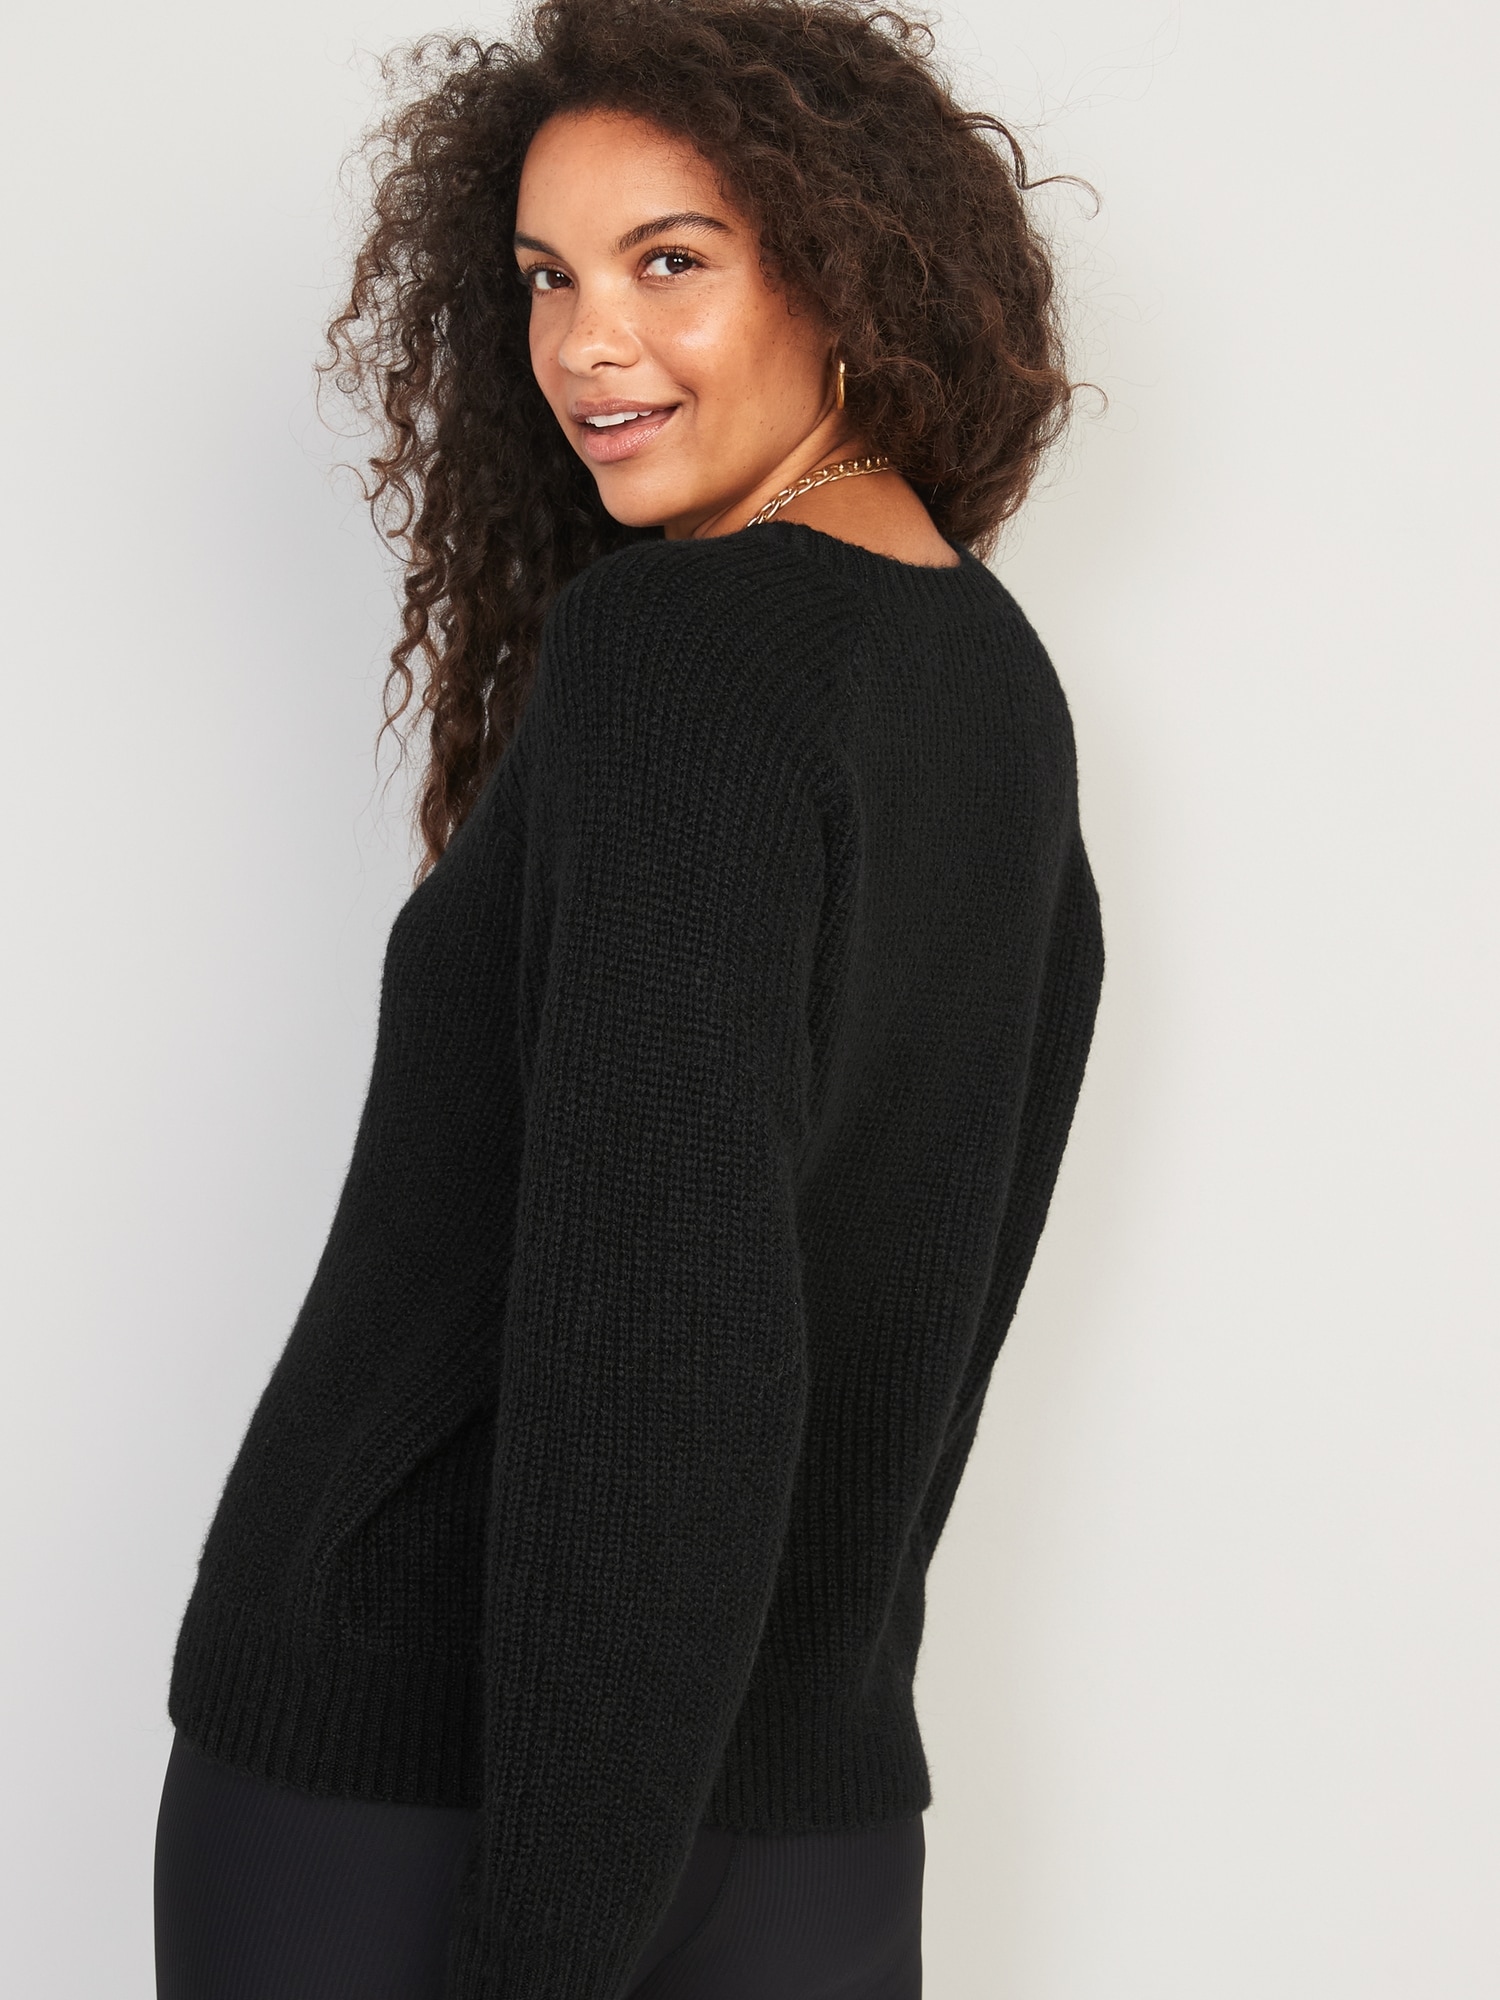 Cozy Shaker-Stitch Pullover Sweater for Women | Old Navy